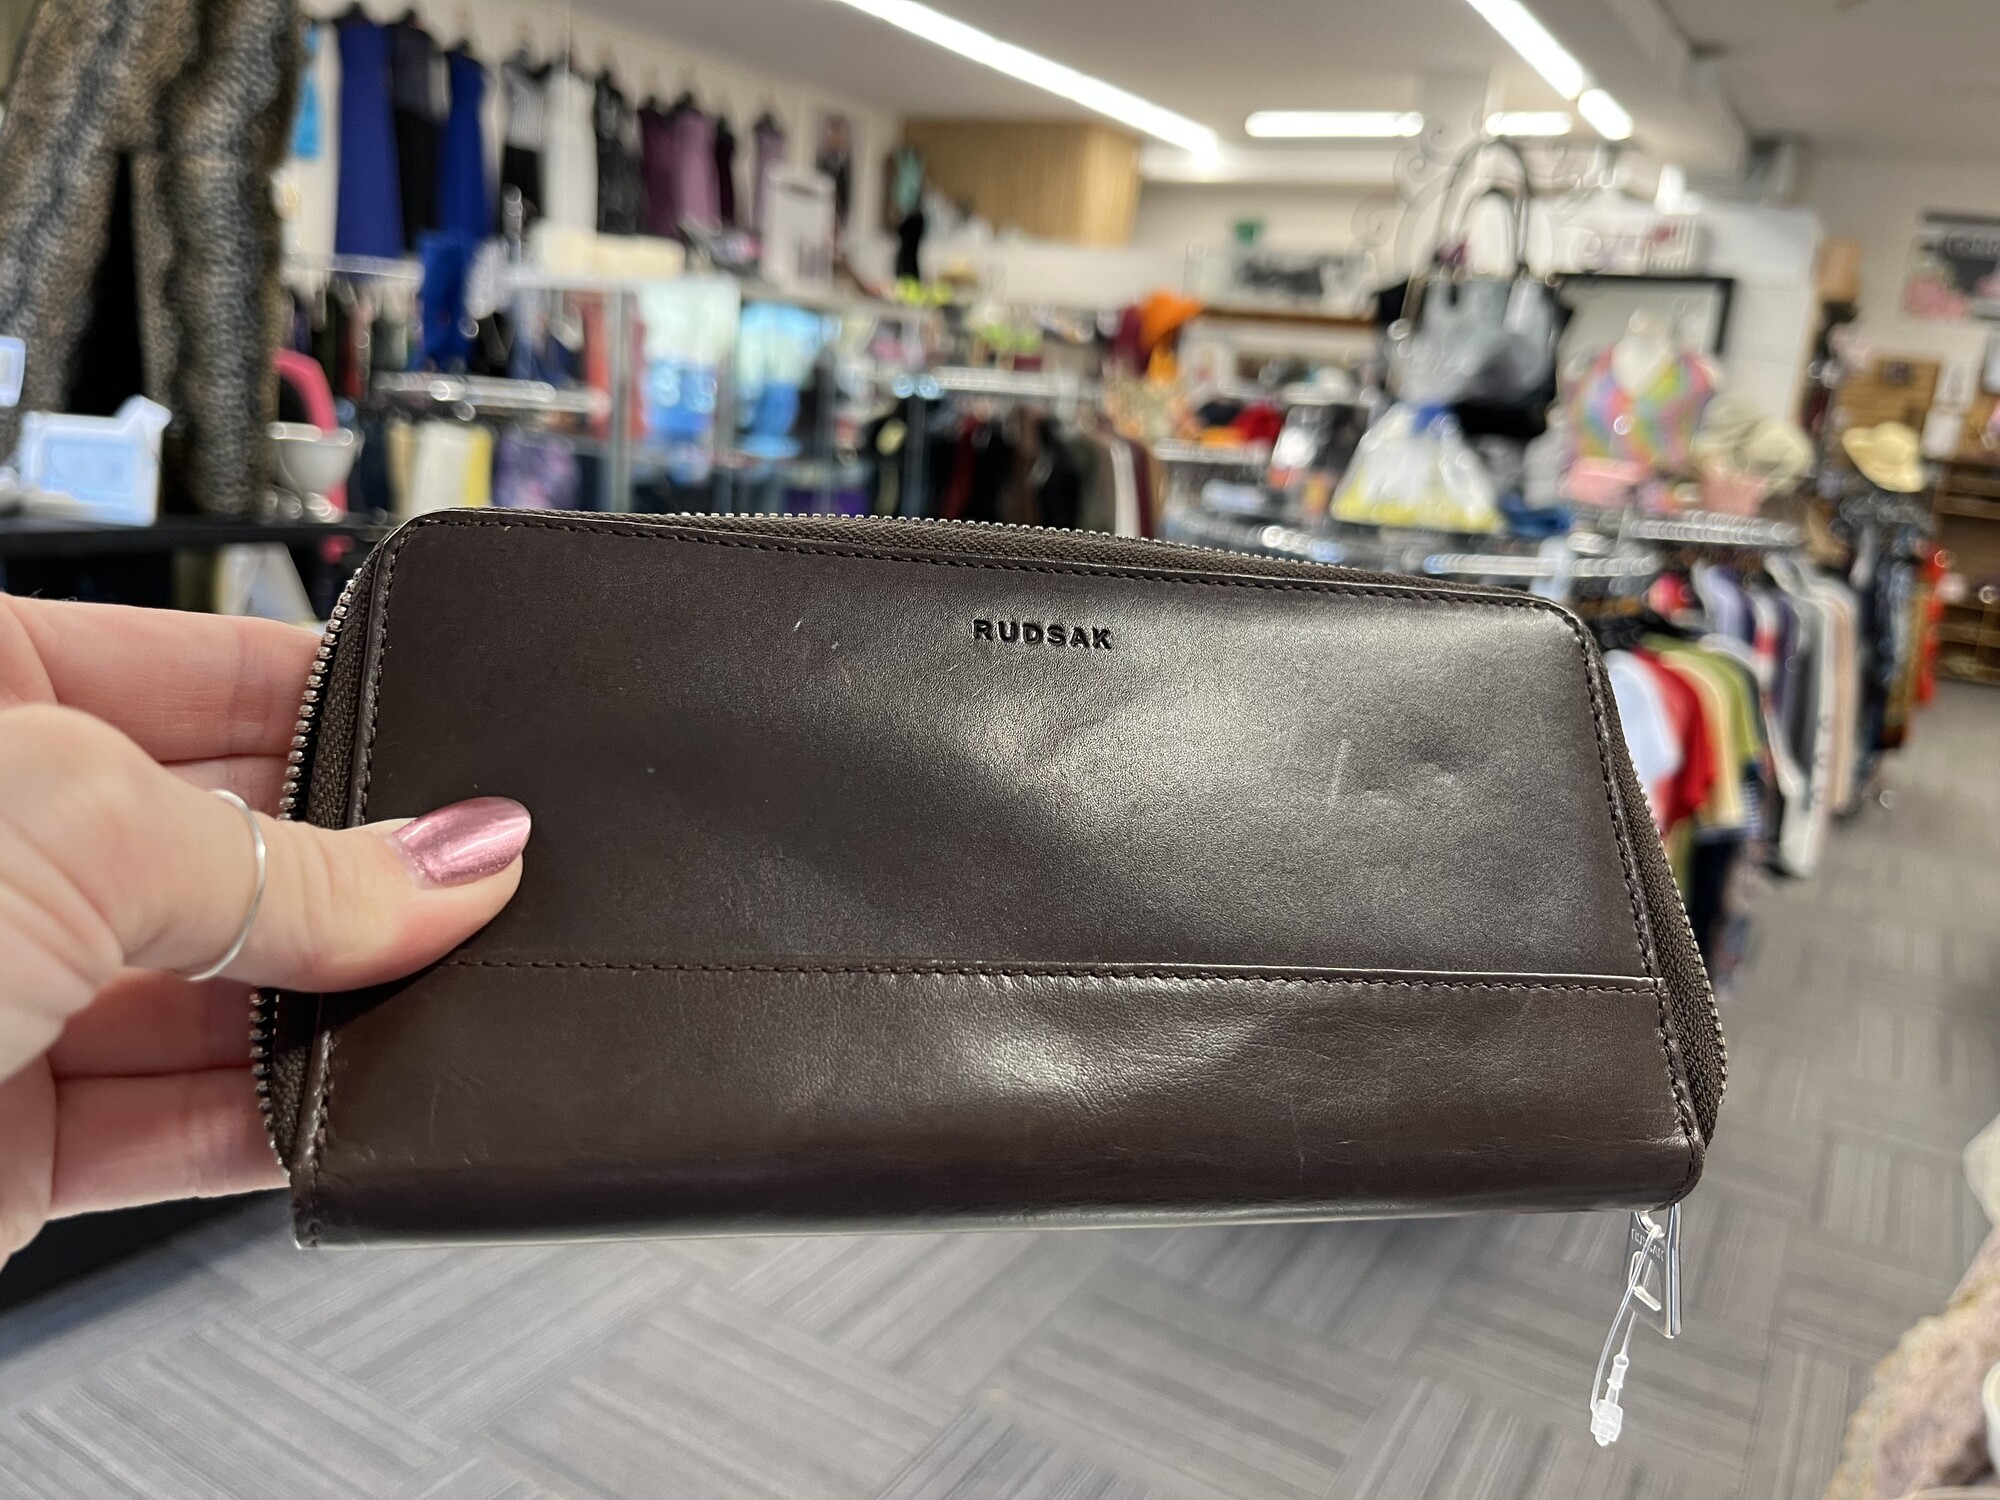 Brown Zip Leather Wallet in Excellent preloved condition!